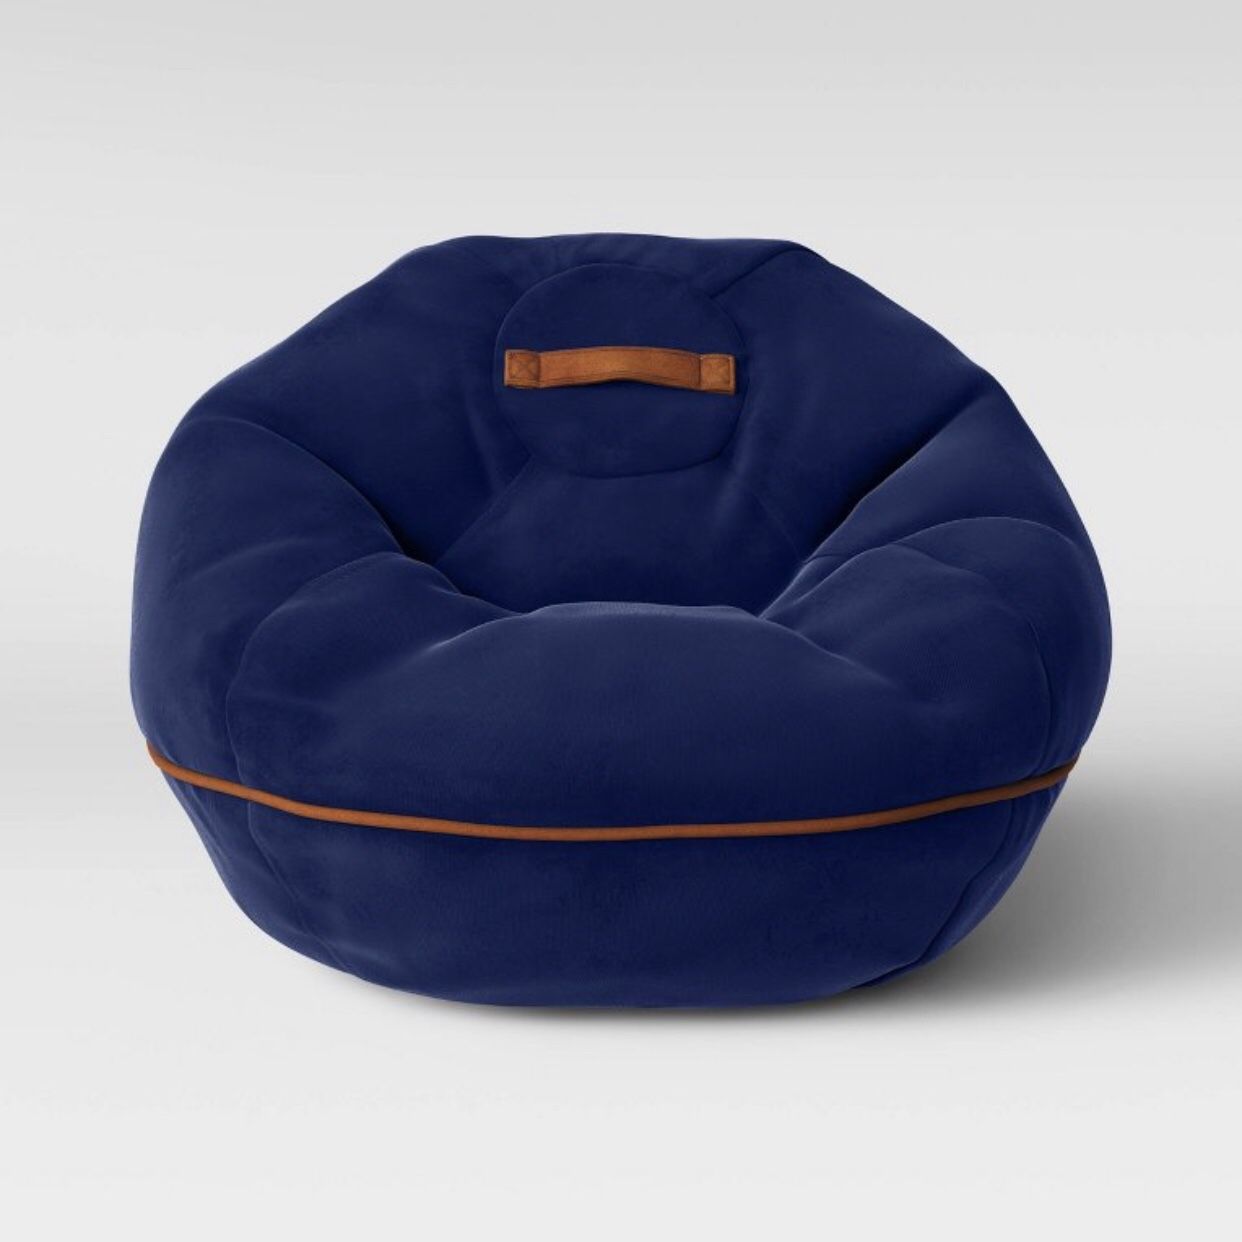 Bean Bag Chair With Suede Piping Navy - Pillowfort